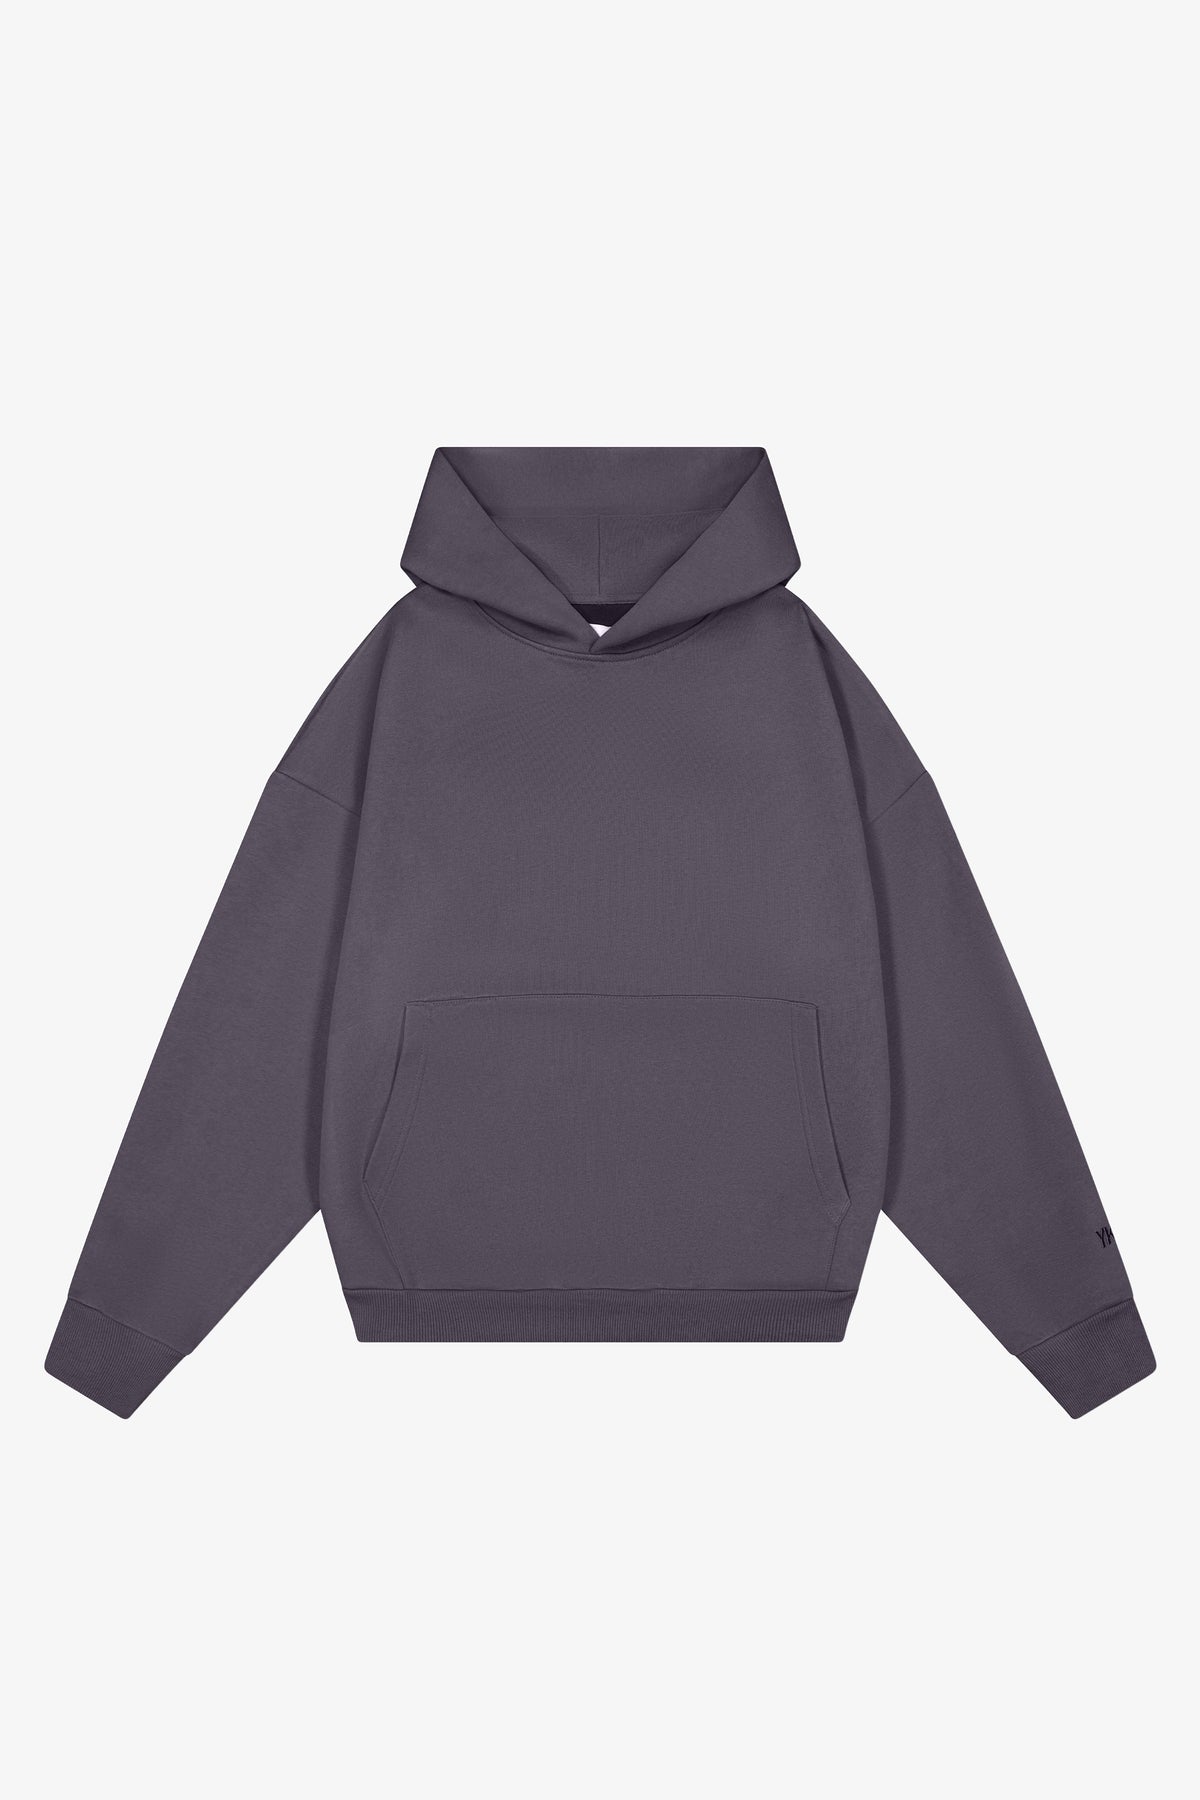 NOTHING HOODIE | CONCRETE